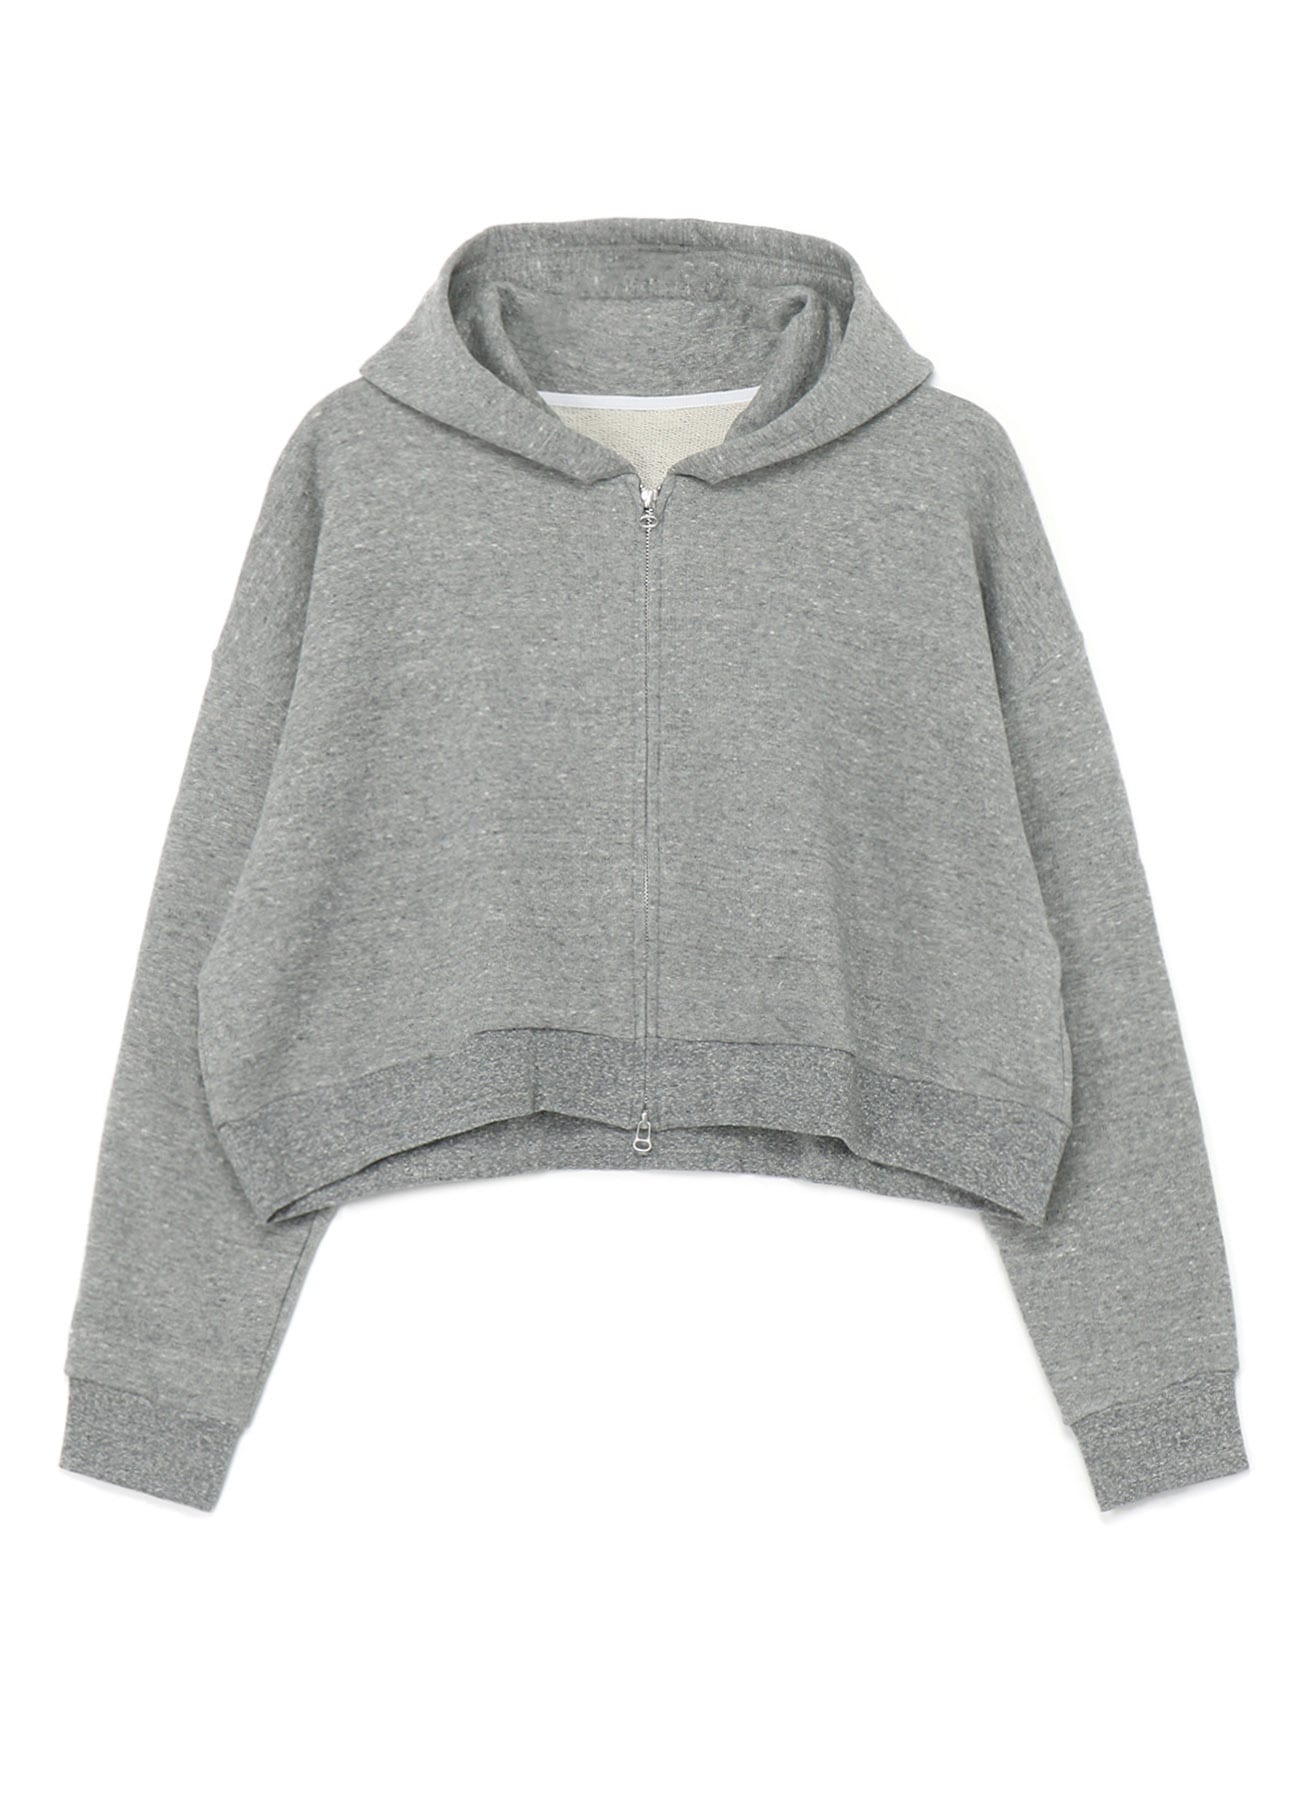 FRENCH TERRY Y'S LOGO EMBROIDERY CROPPED ZIP-UP HOODIE